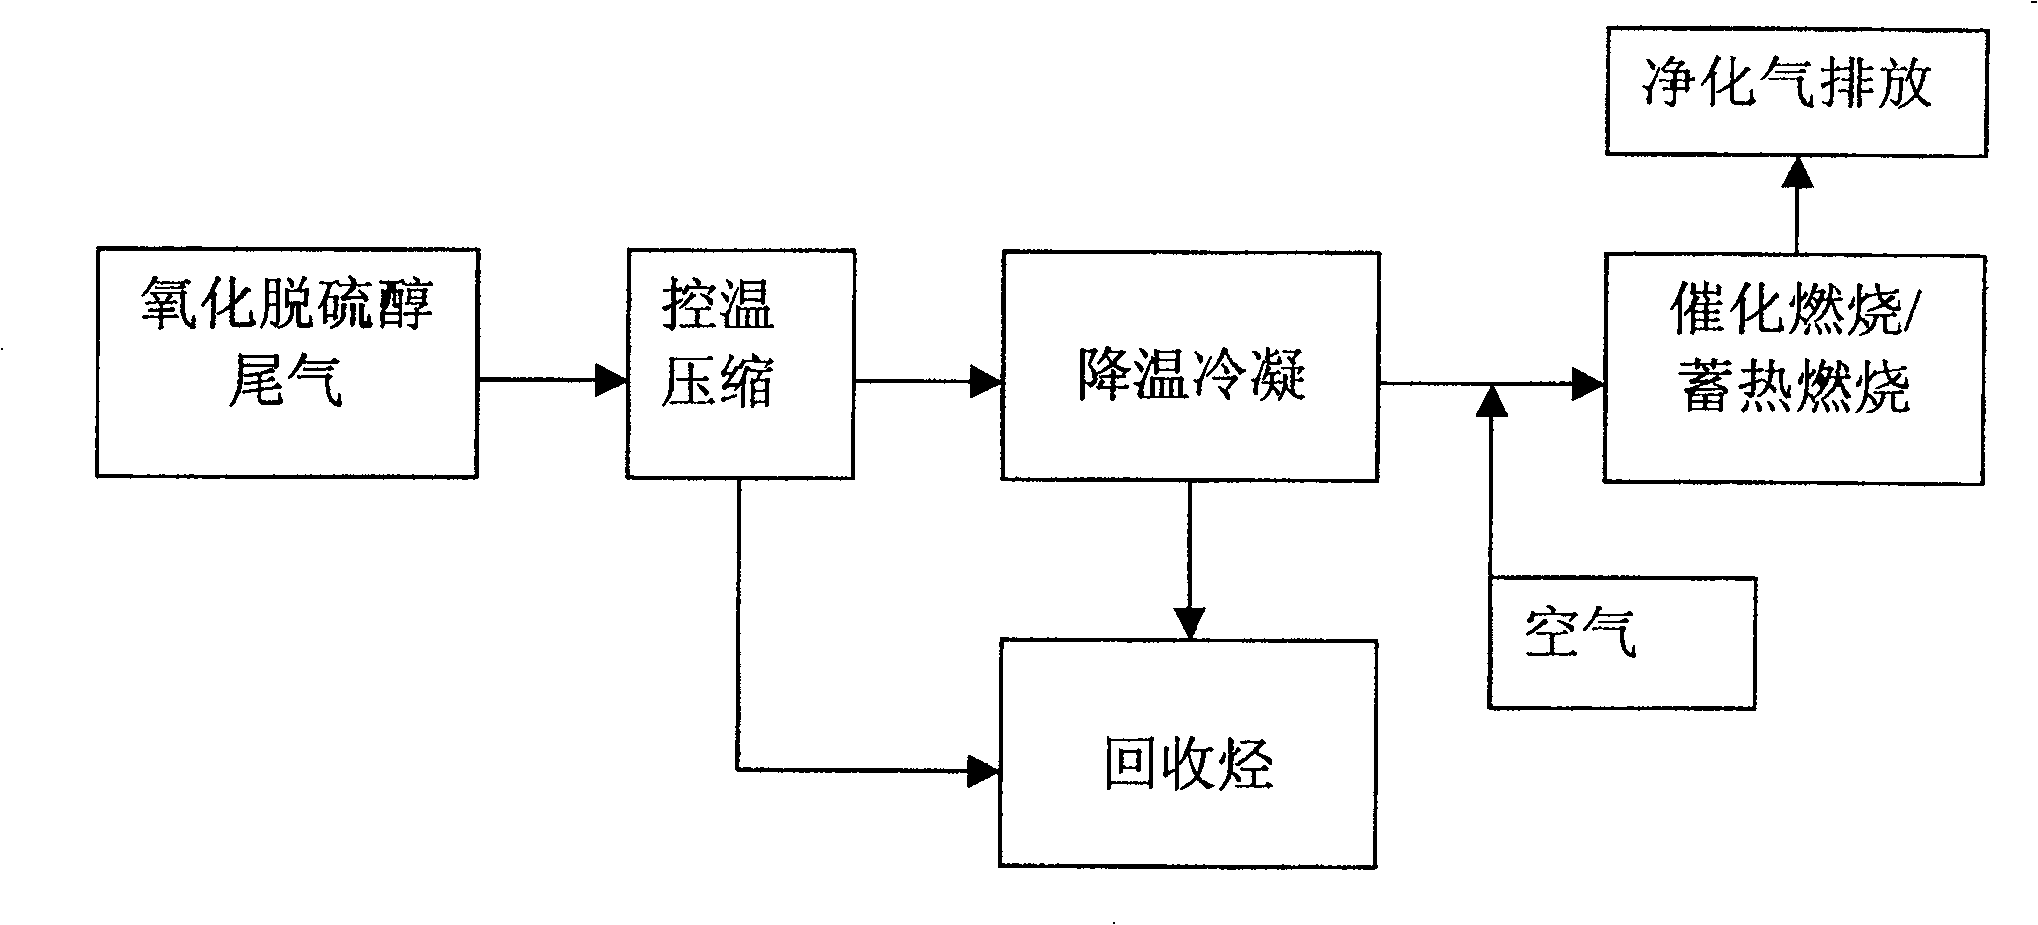 Method for processing light hydrocarbon oxidation sweetening tail gas